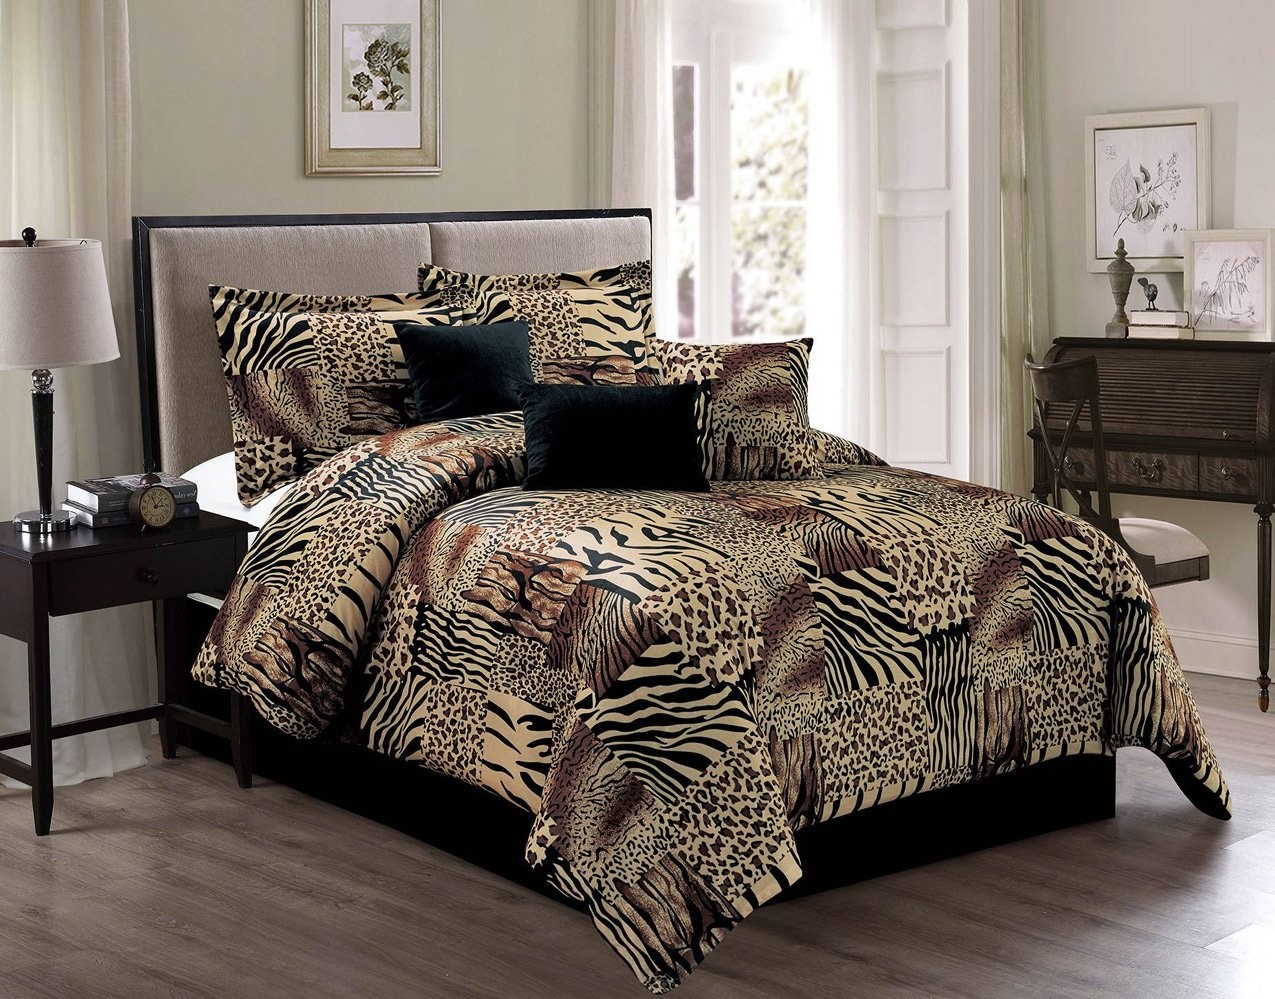 Brown bedding sets for bedroom ease bedding with style